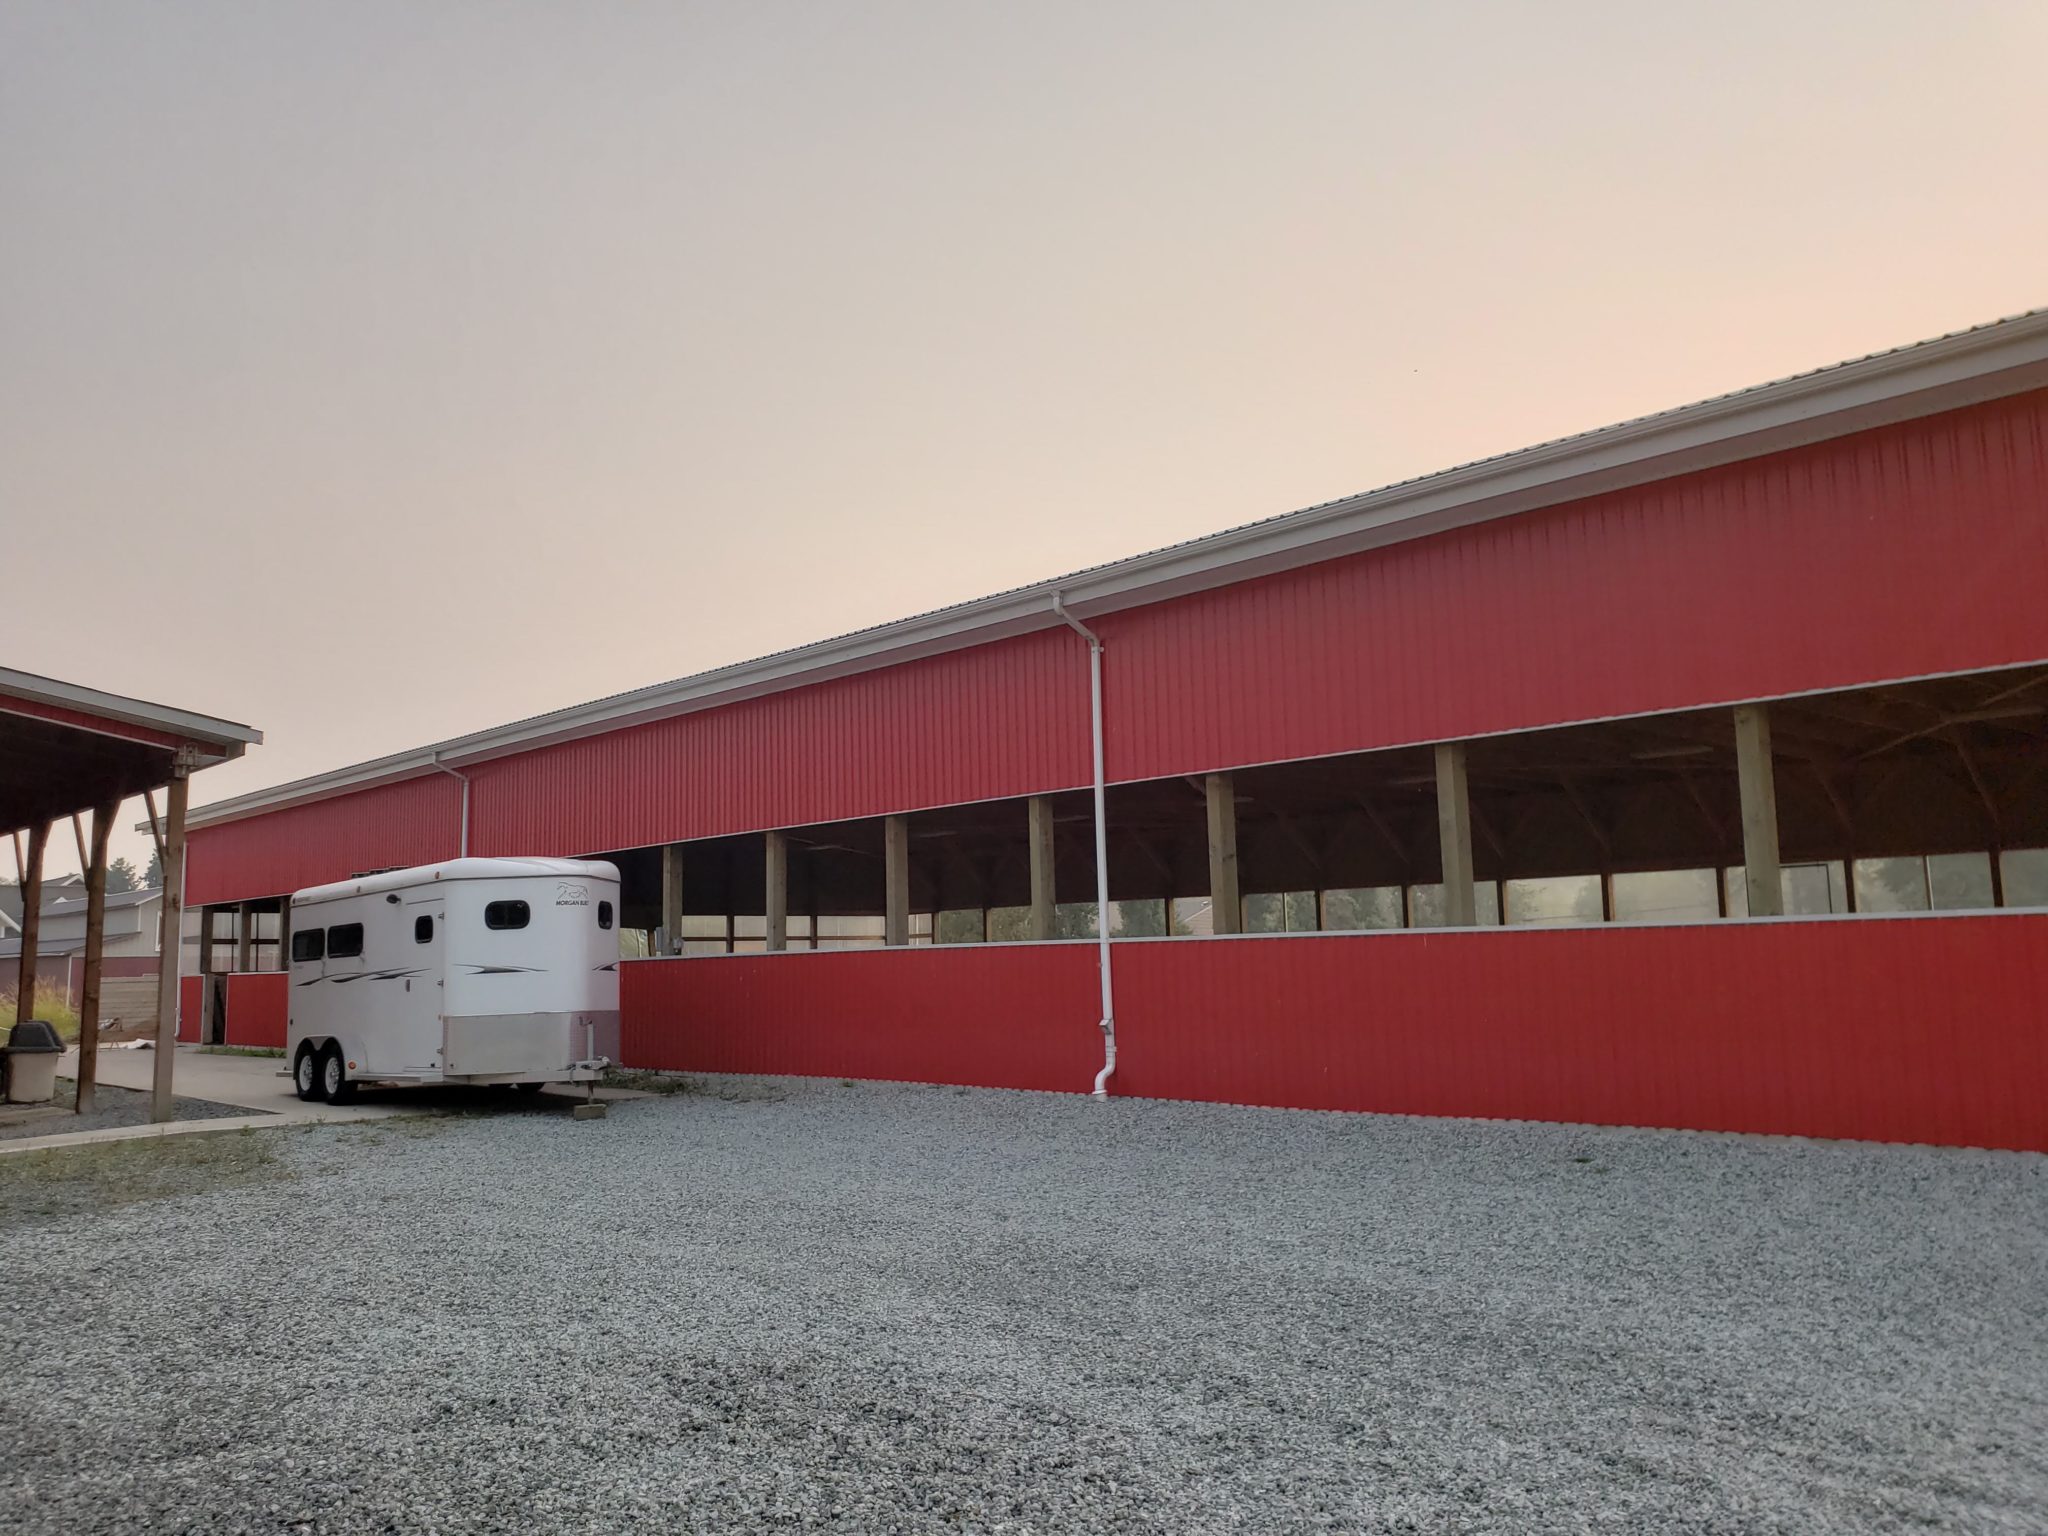 Commercial Pressure Washing exterior of horse stalls